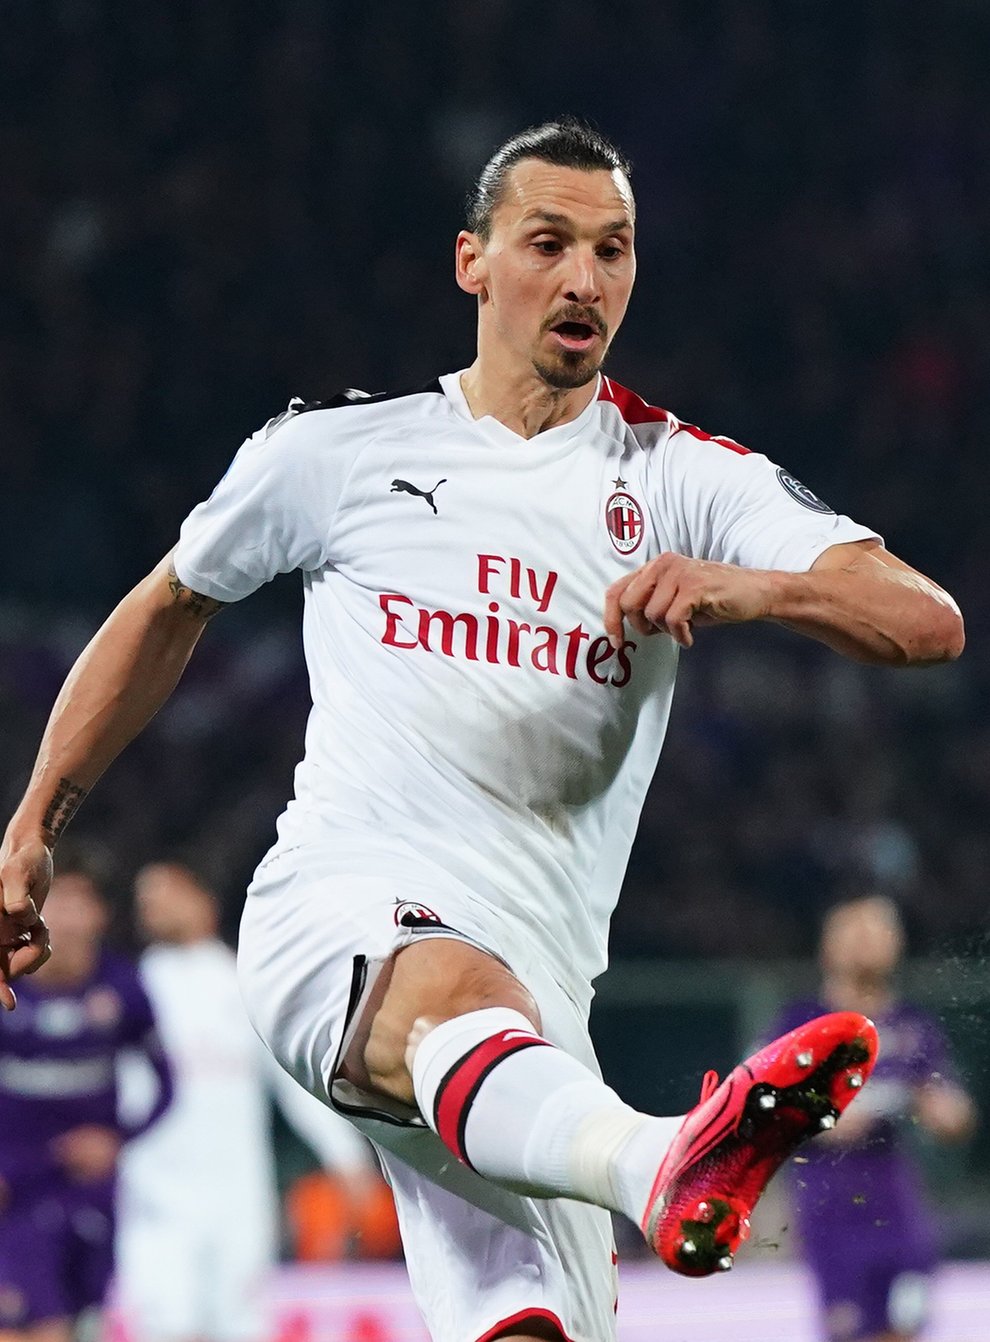 Ibrahimovic's contract at Milan expires at the end of the season